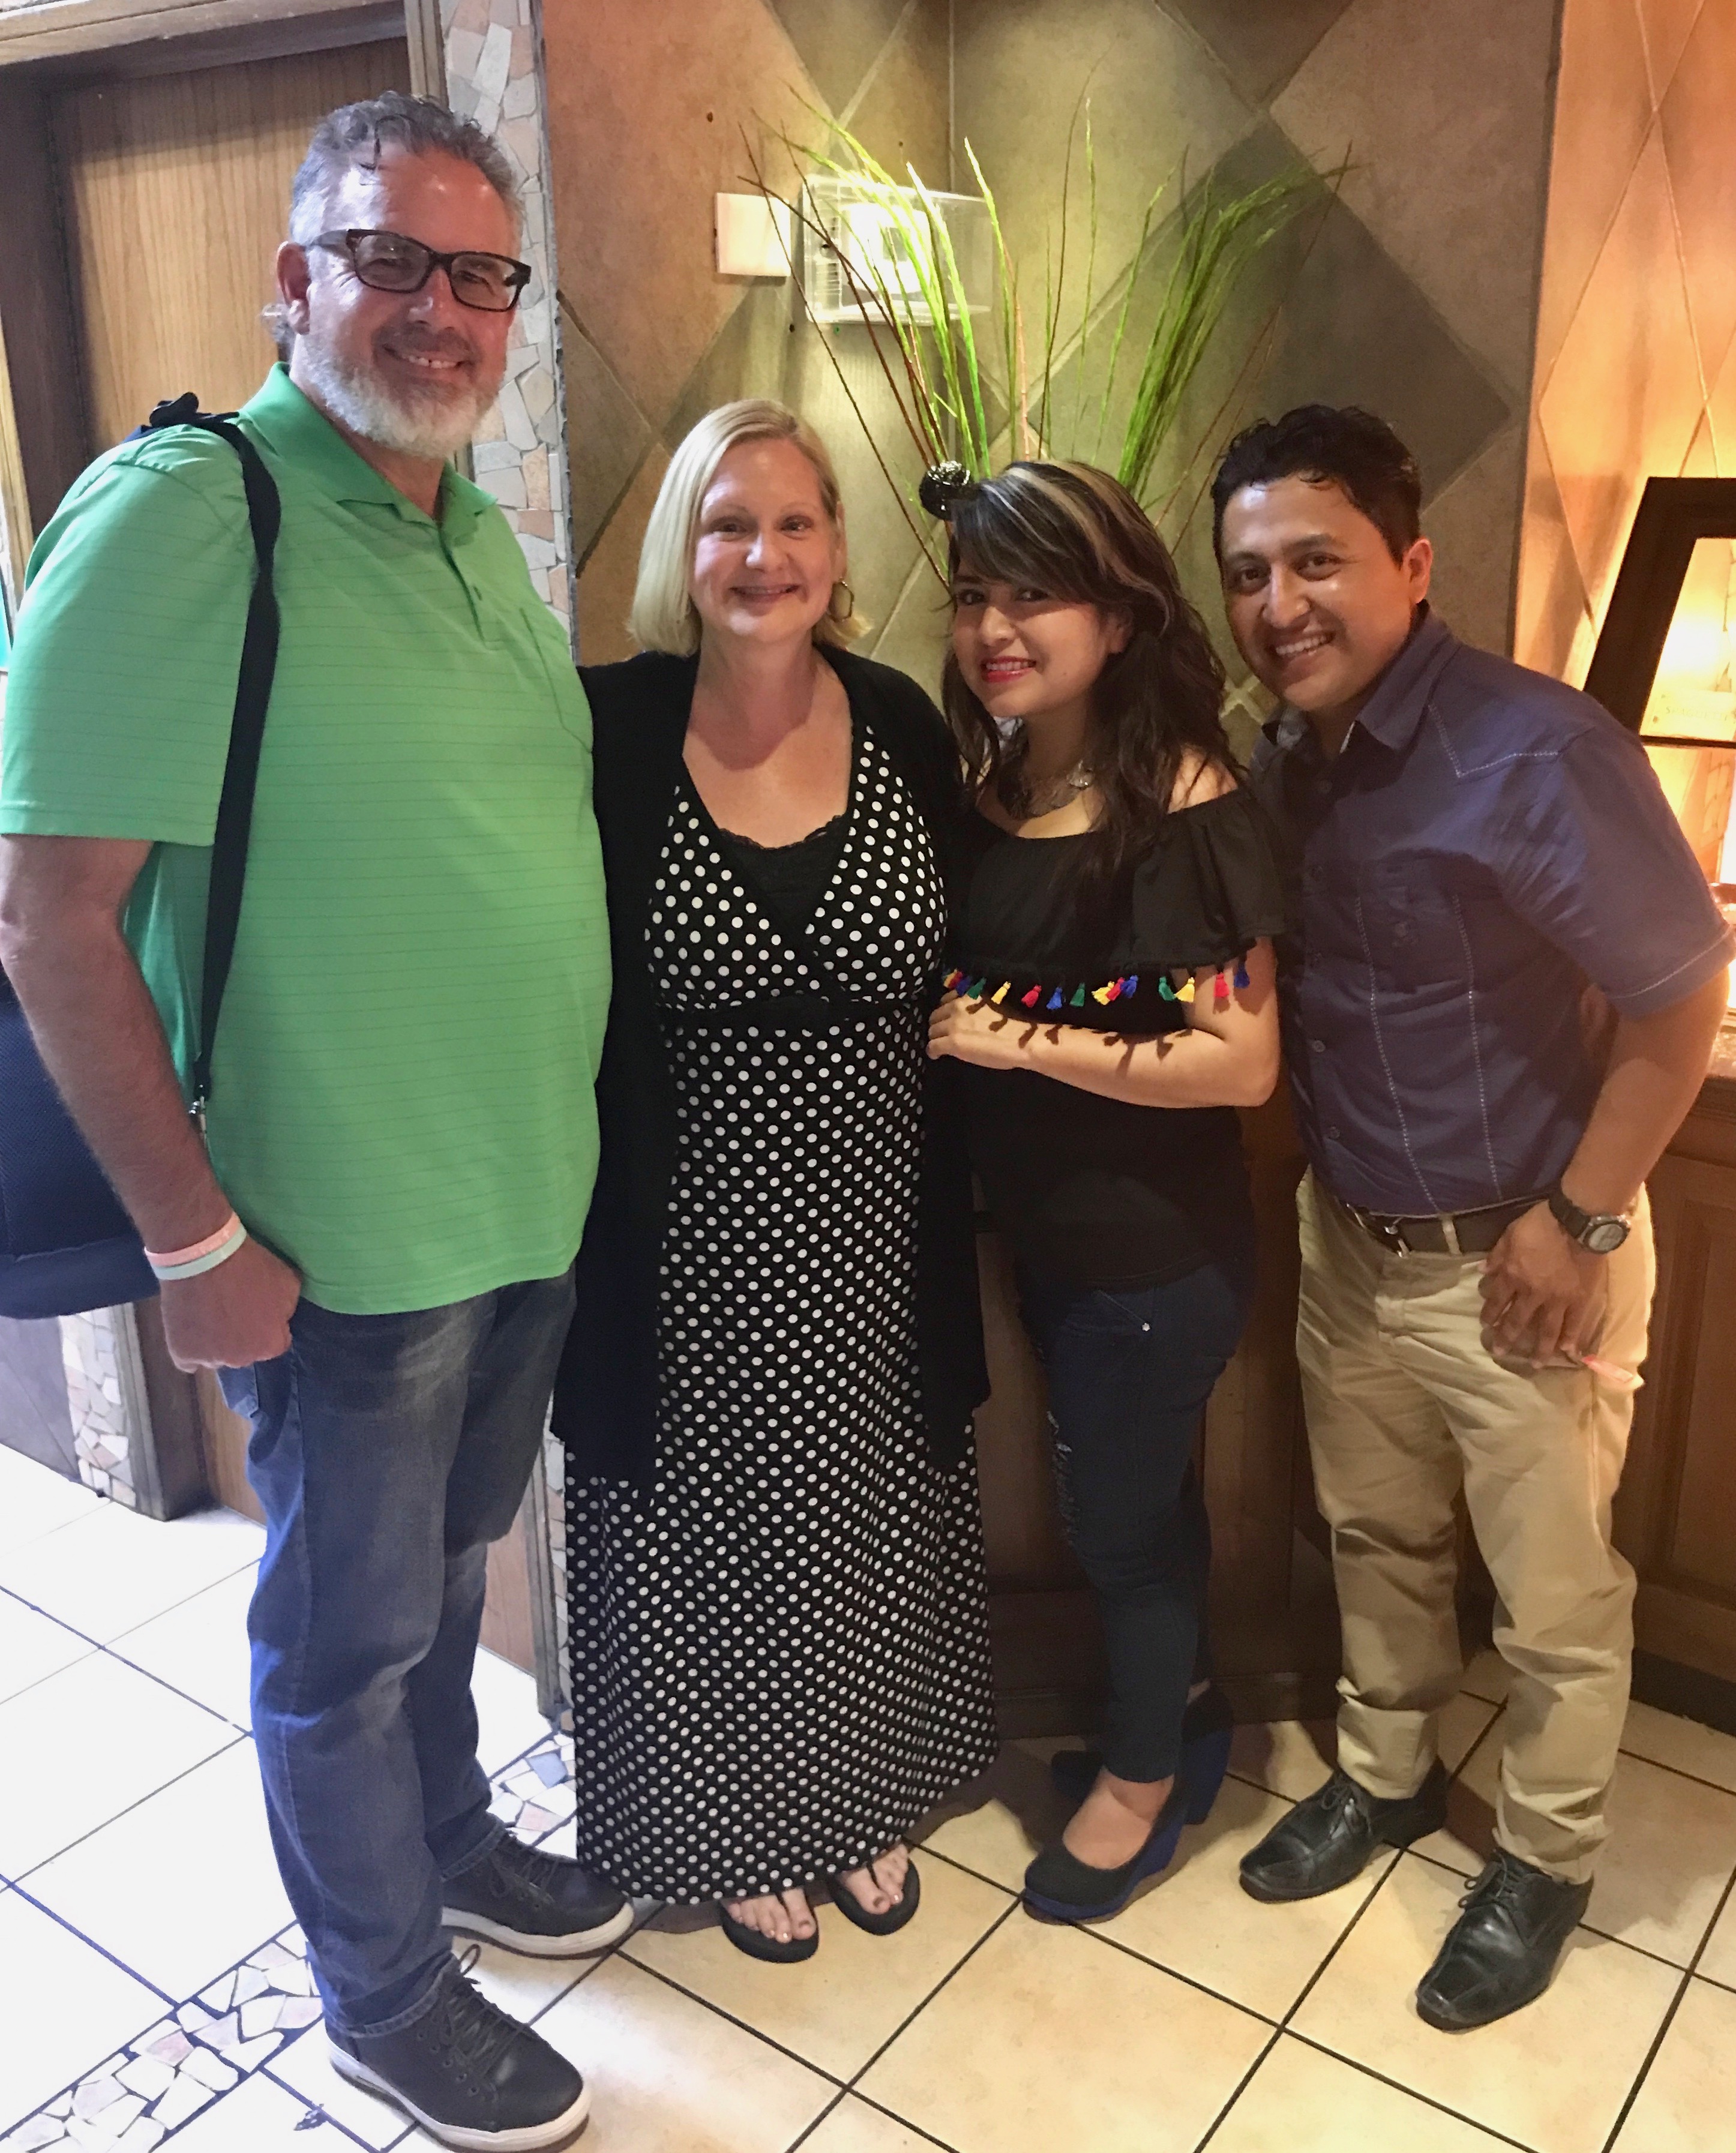 David & Dawn with Luz and Deivis. Wonderful friends and ministers of the gospel